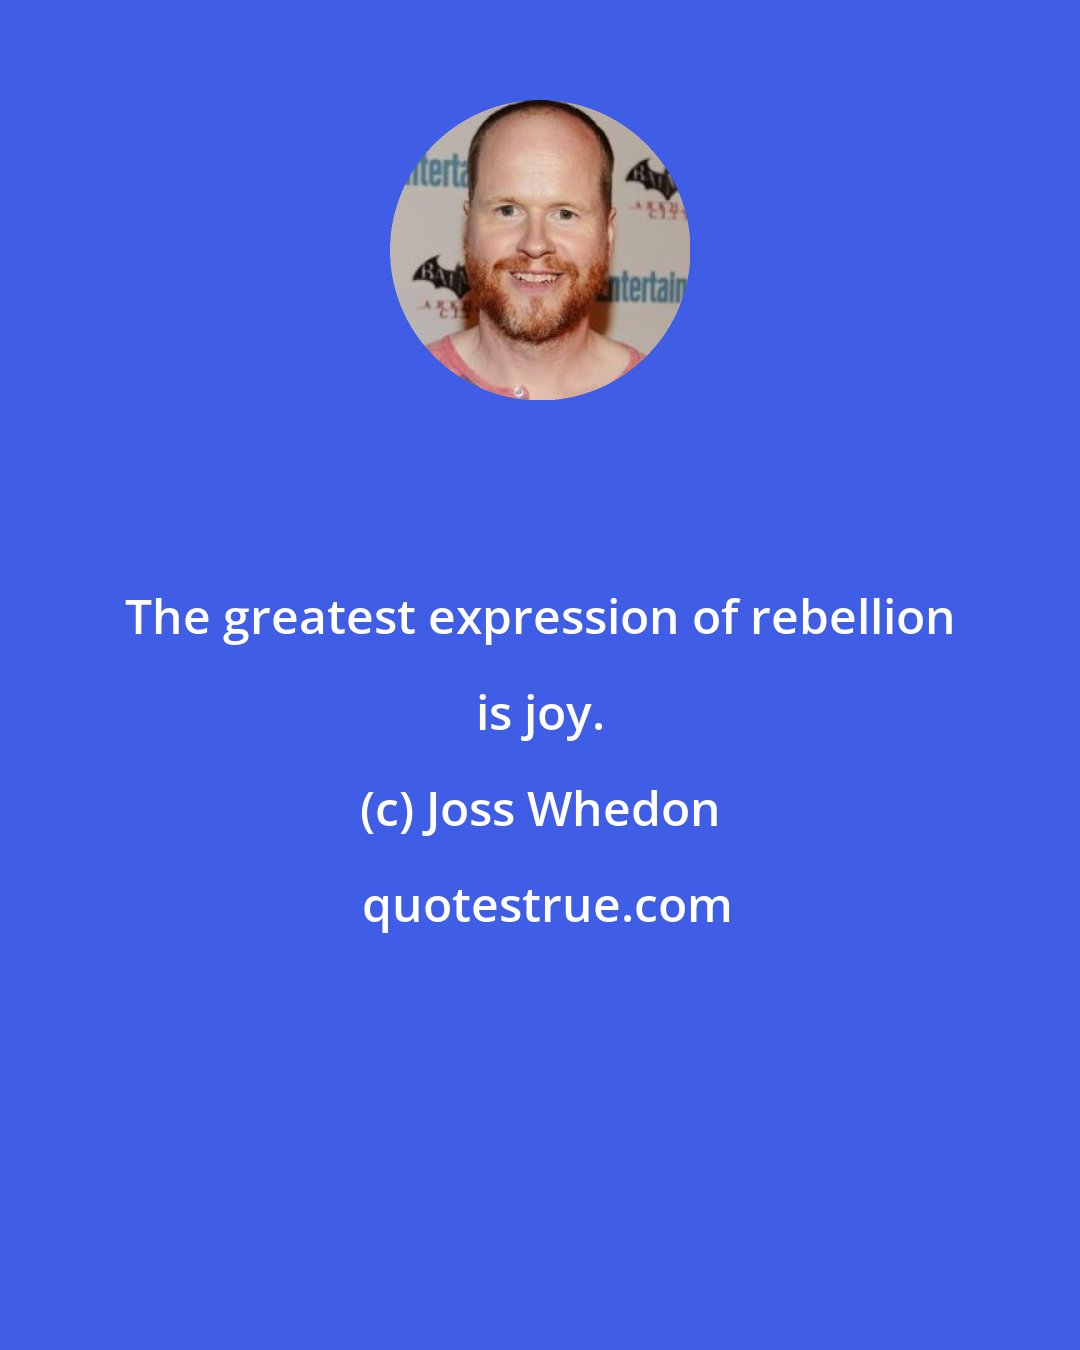 Joss Whedon: The greatest expression of rebellion is joy.